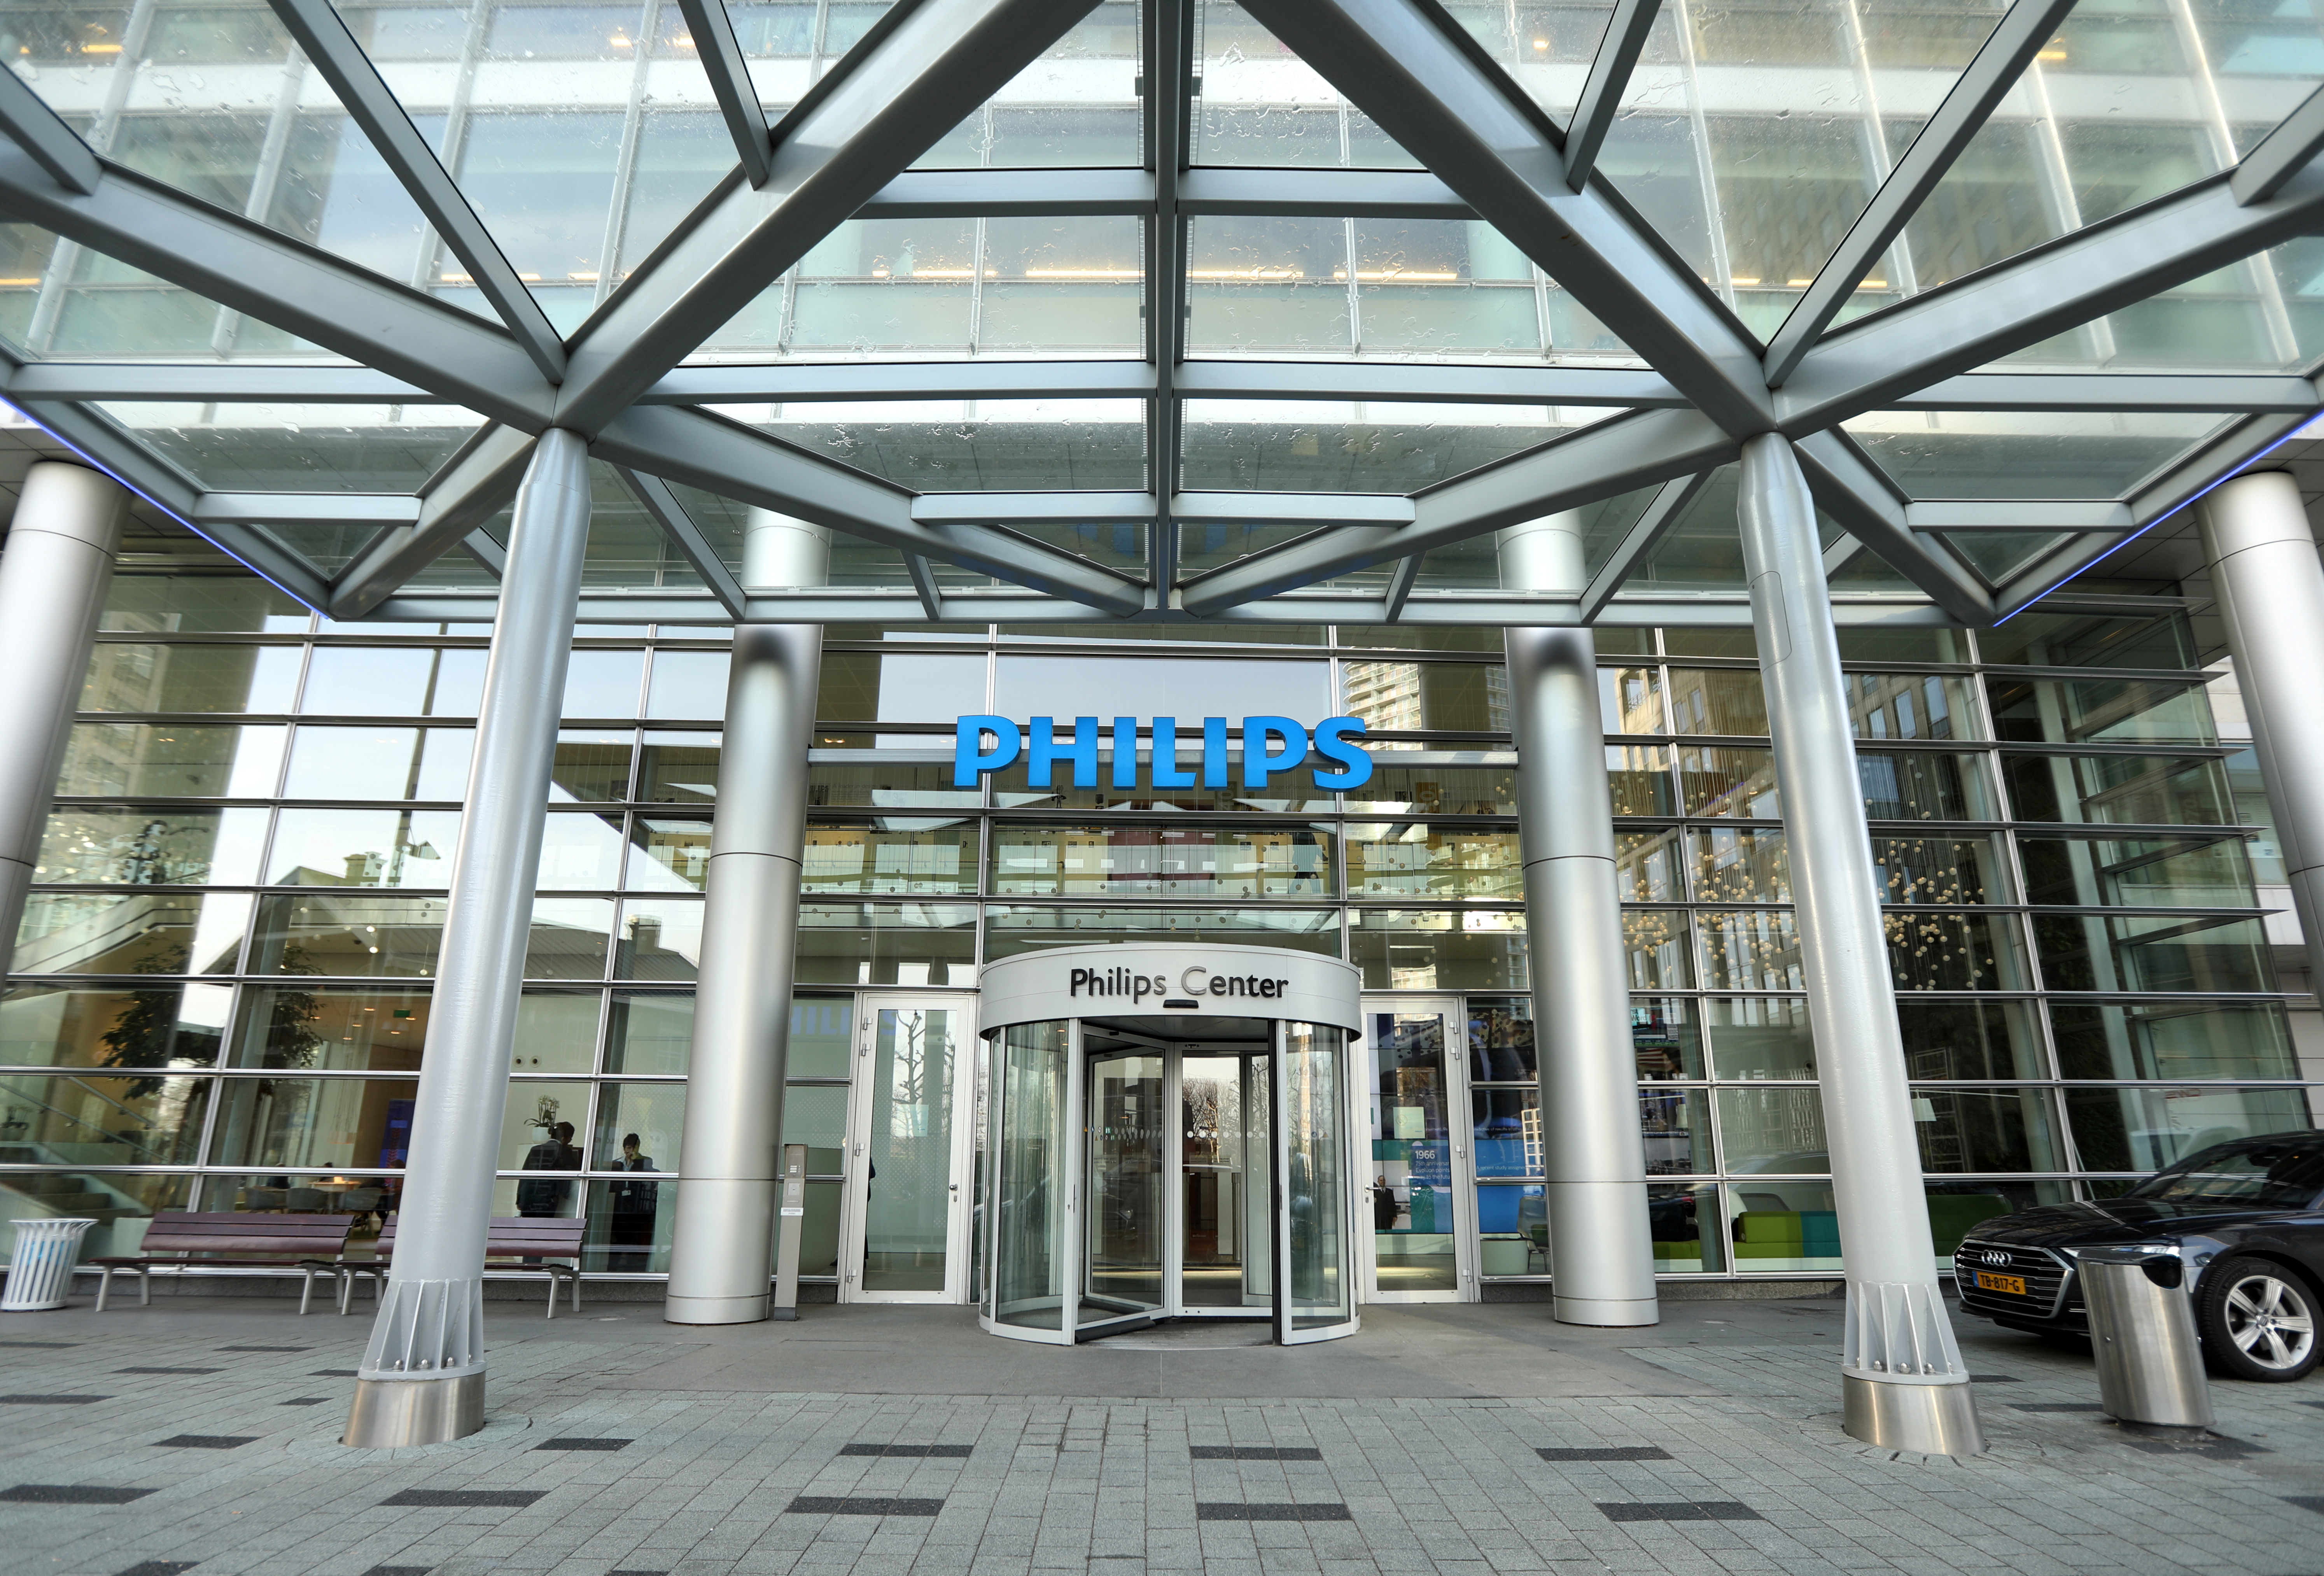 Dutch health technology company Philips presents the company's financial results for the fourth quarter in Amsterdam